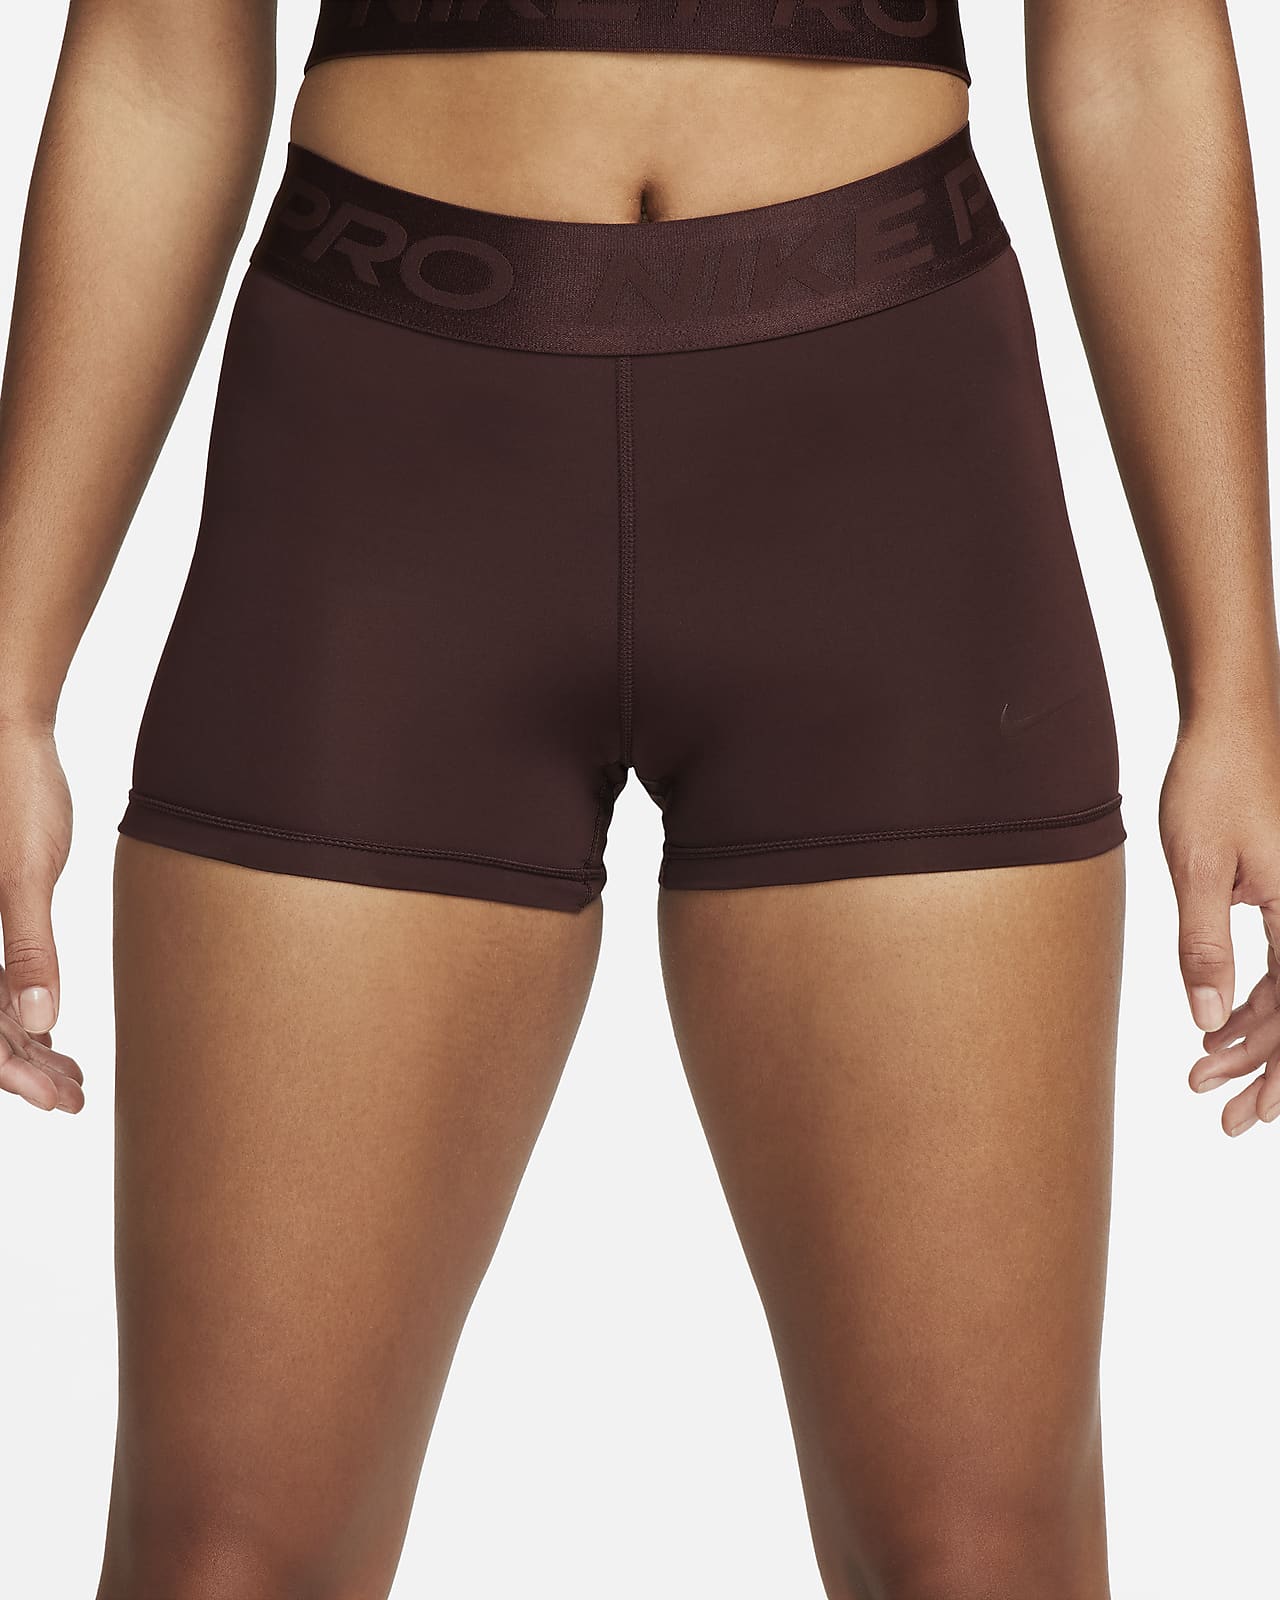 NEW! Nike [S] Women's Pro 3'' Yoga/Volleyball Shorts, Obsidian